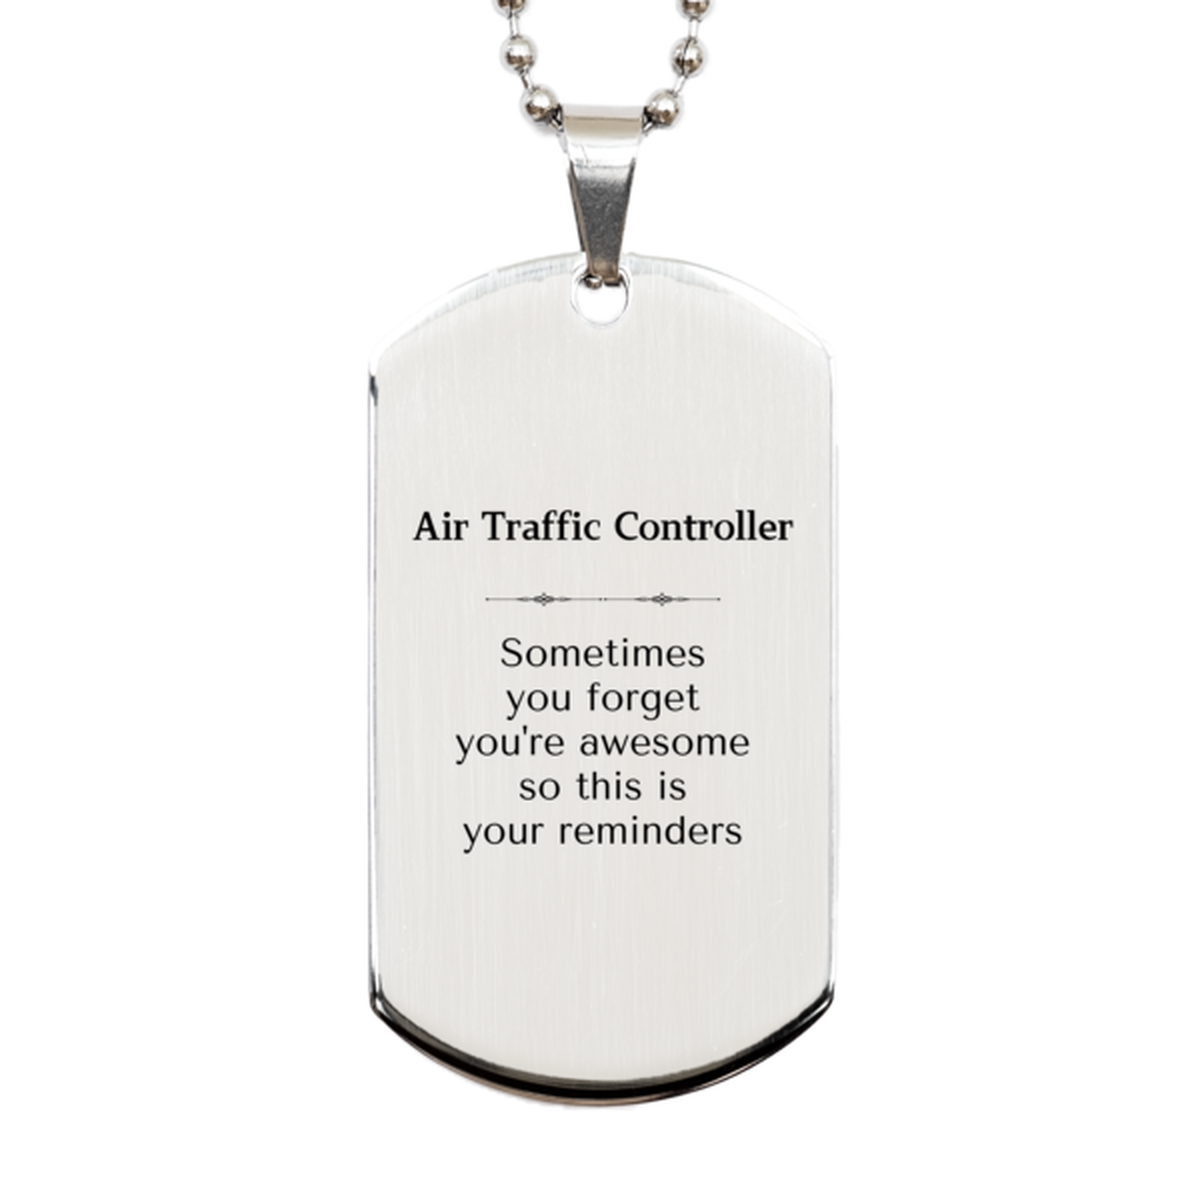 Sentimental Air Traffic Controller Silver Dog Tag, Air Traffic Controller Sometimes you forget you're awesome so this is your reminders, Graduation Christmas Birthday Gifts for Air Traffic Controller, Men, Women, Coworkers